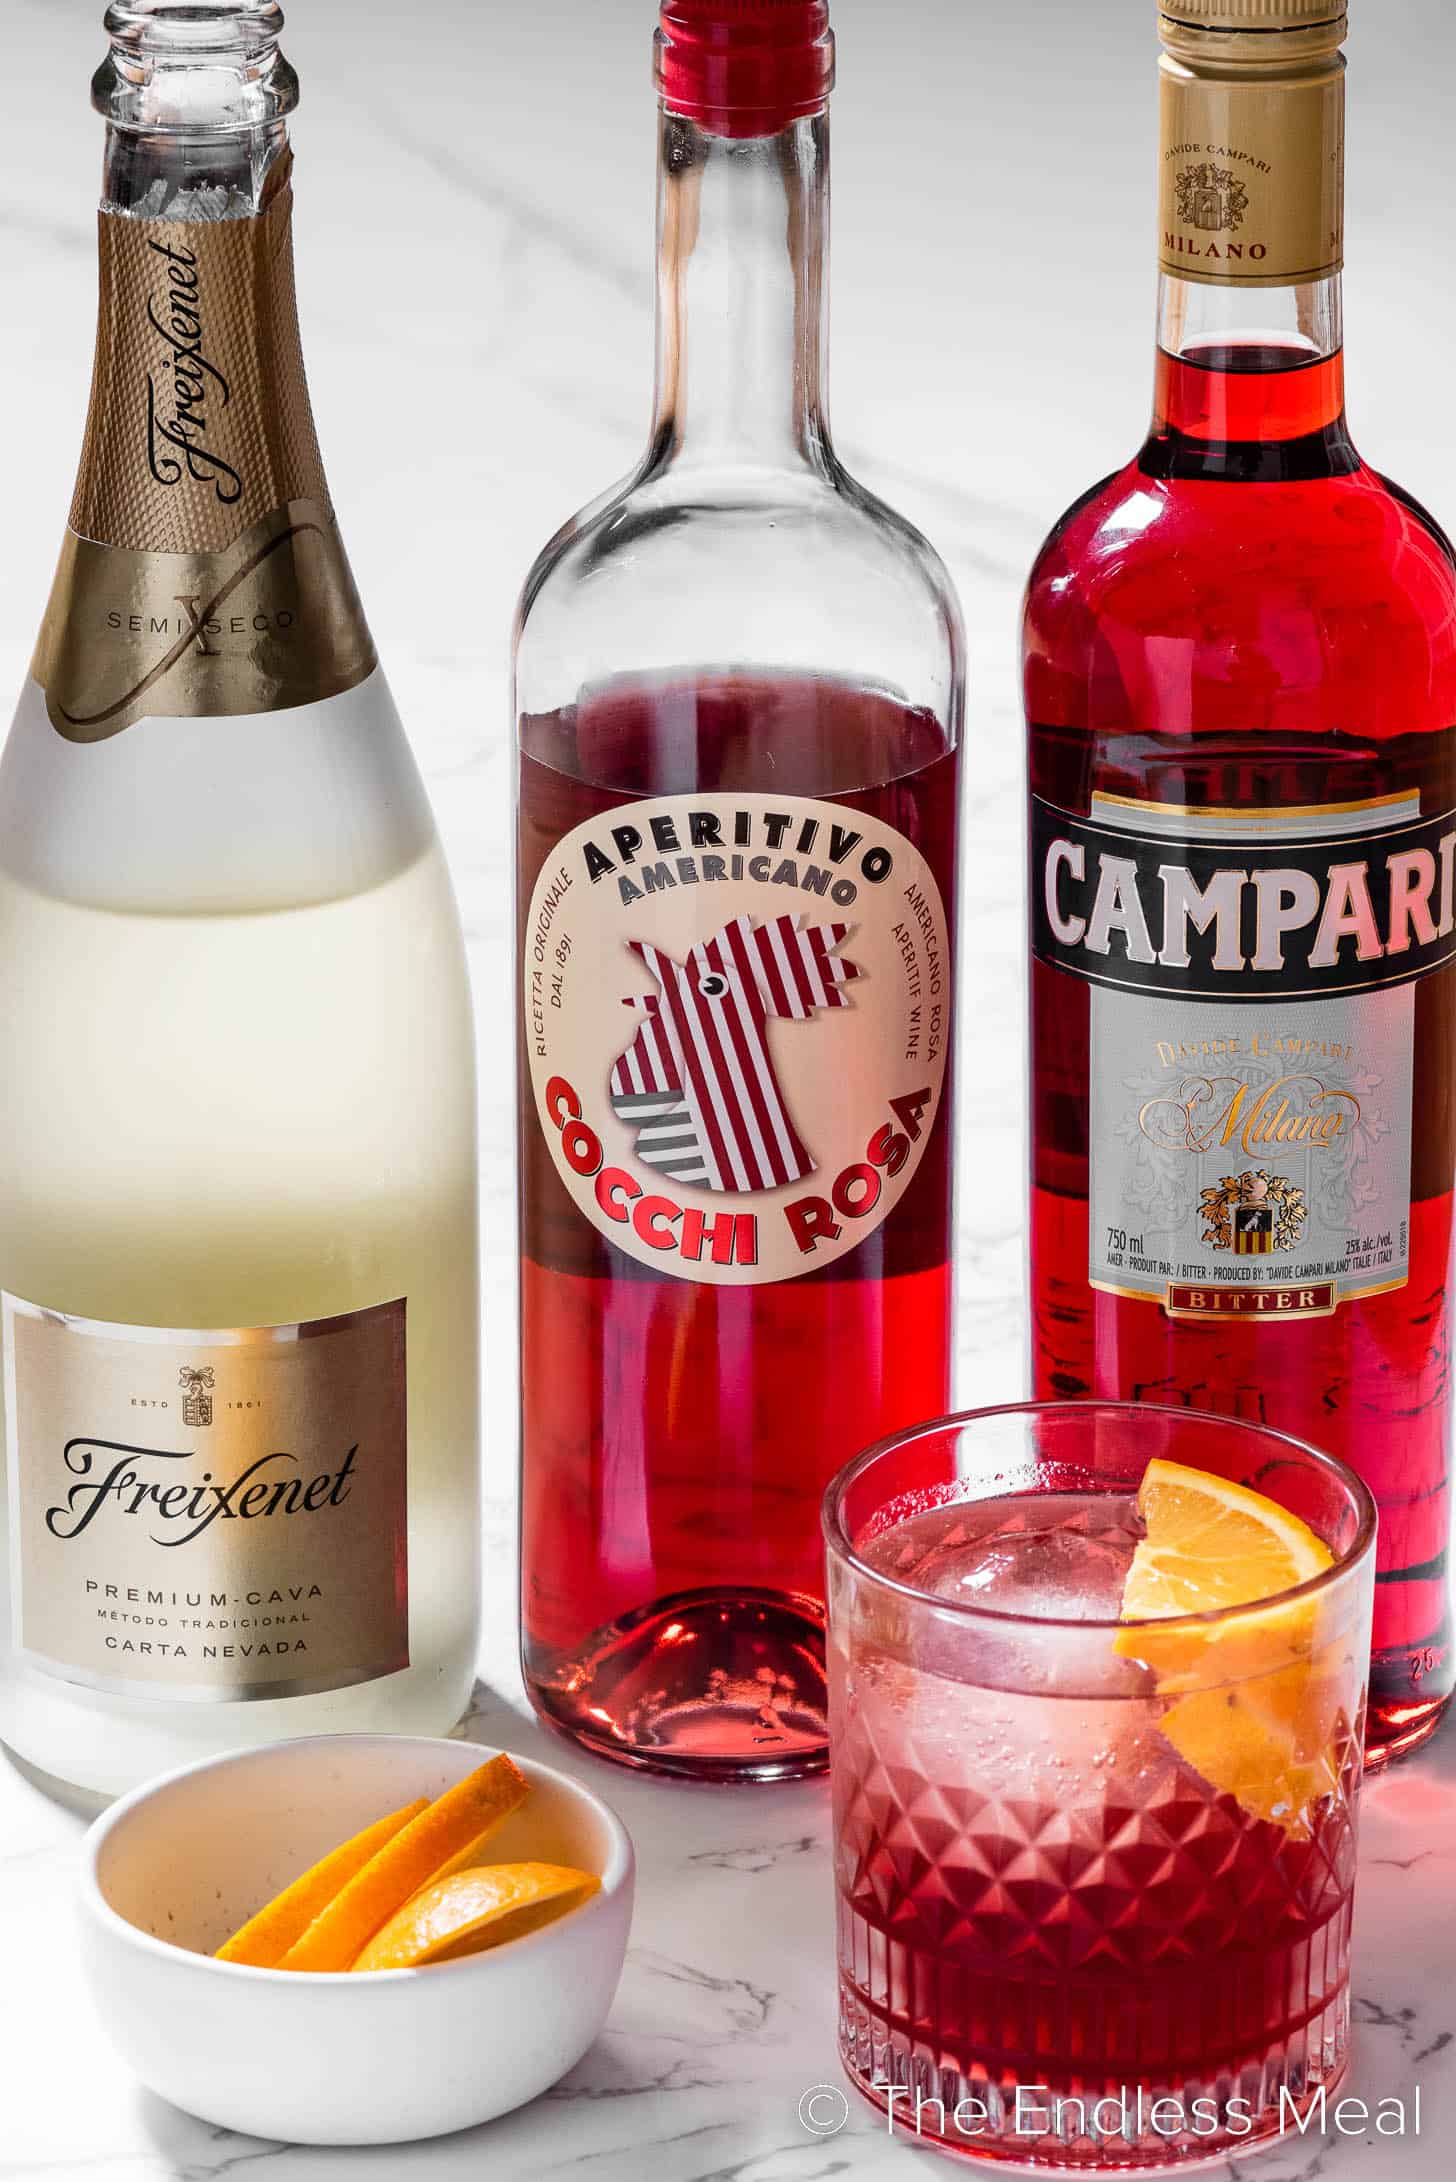 The ingredients needed to make a Negroni Sbagliato cocktail with prosecco